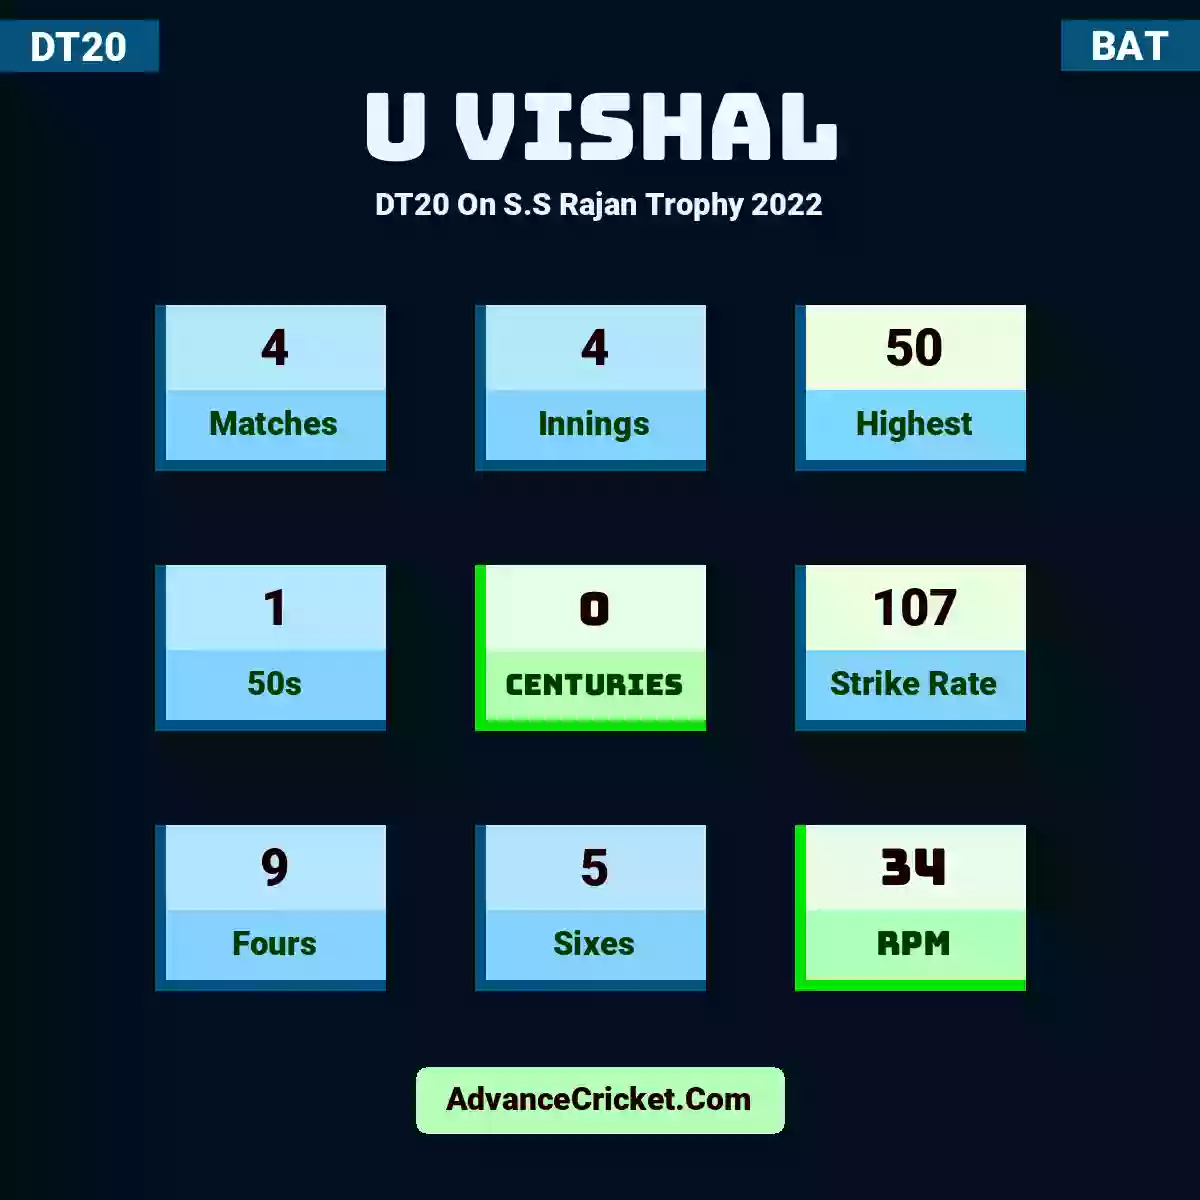 U Vishal DT20  On S.S Rajan Trophy 2022, U Vishal played 4 matches, scored 50 runs as highest, 1 half-centuries, and 0 centuries, with a strike rate of 107. U.Vishal hit 9 fours and 5 sixes, with an RPM of 34.